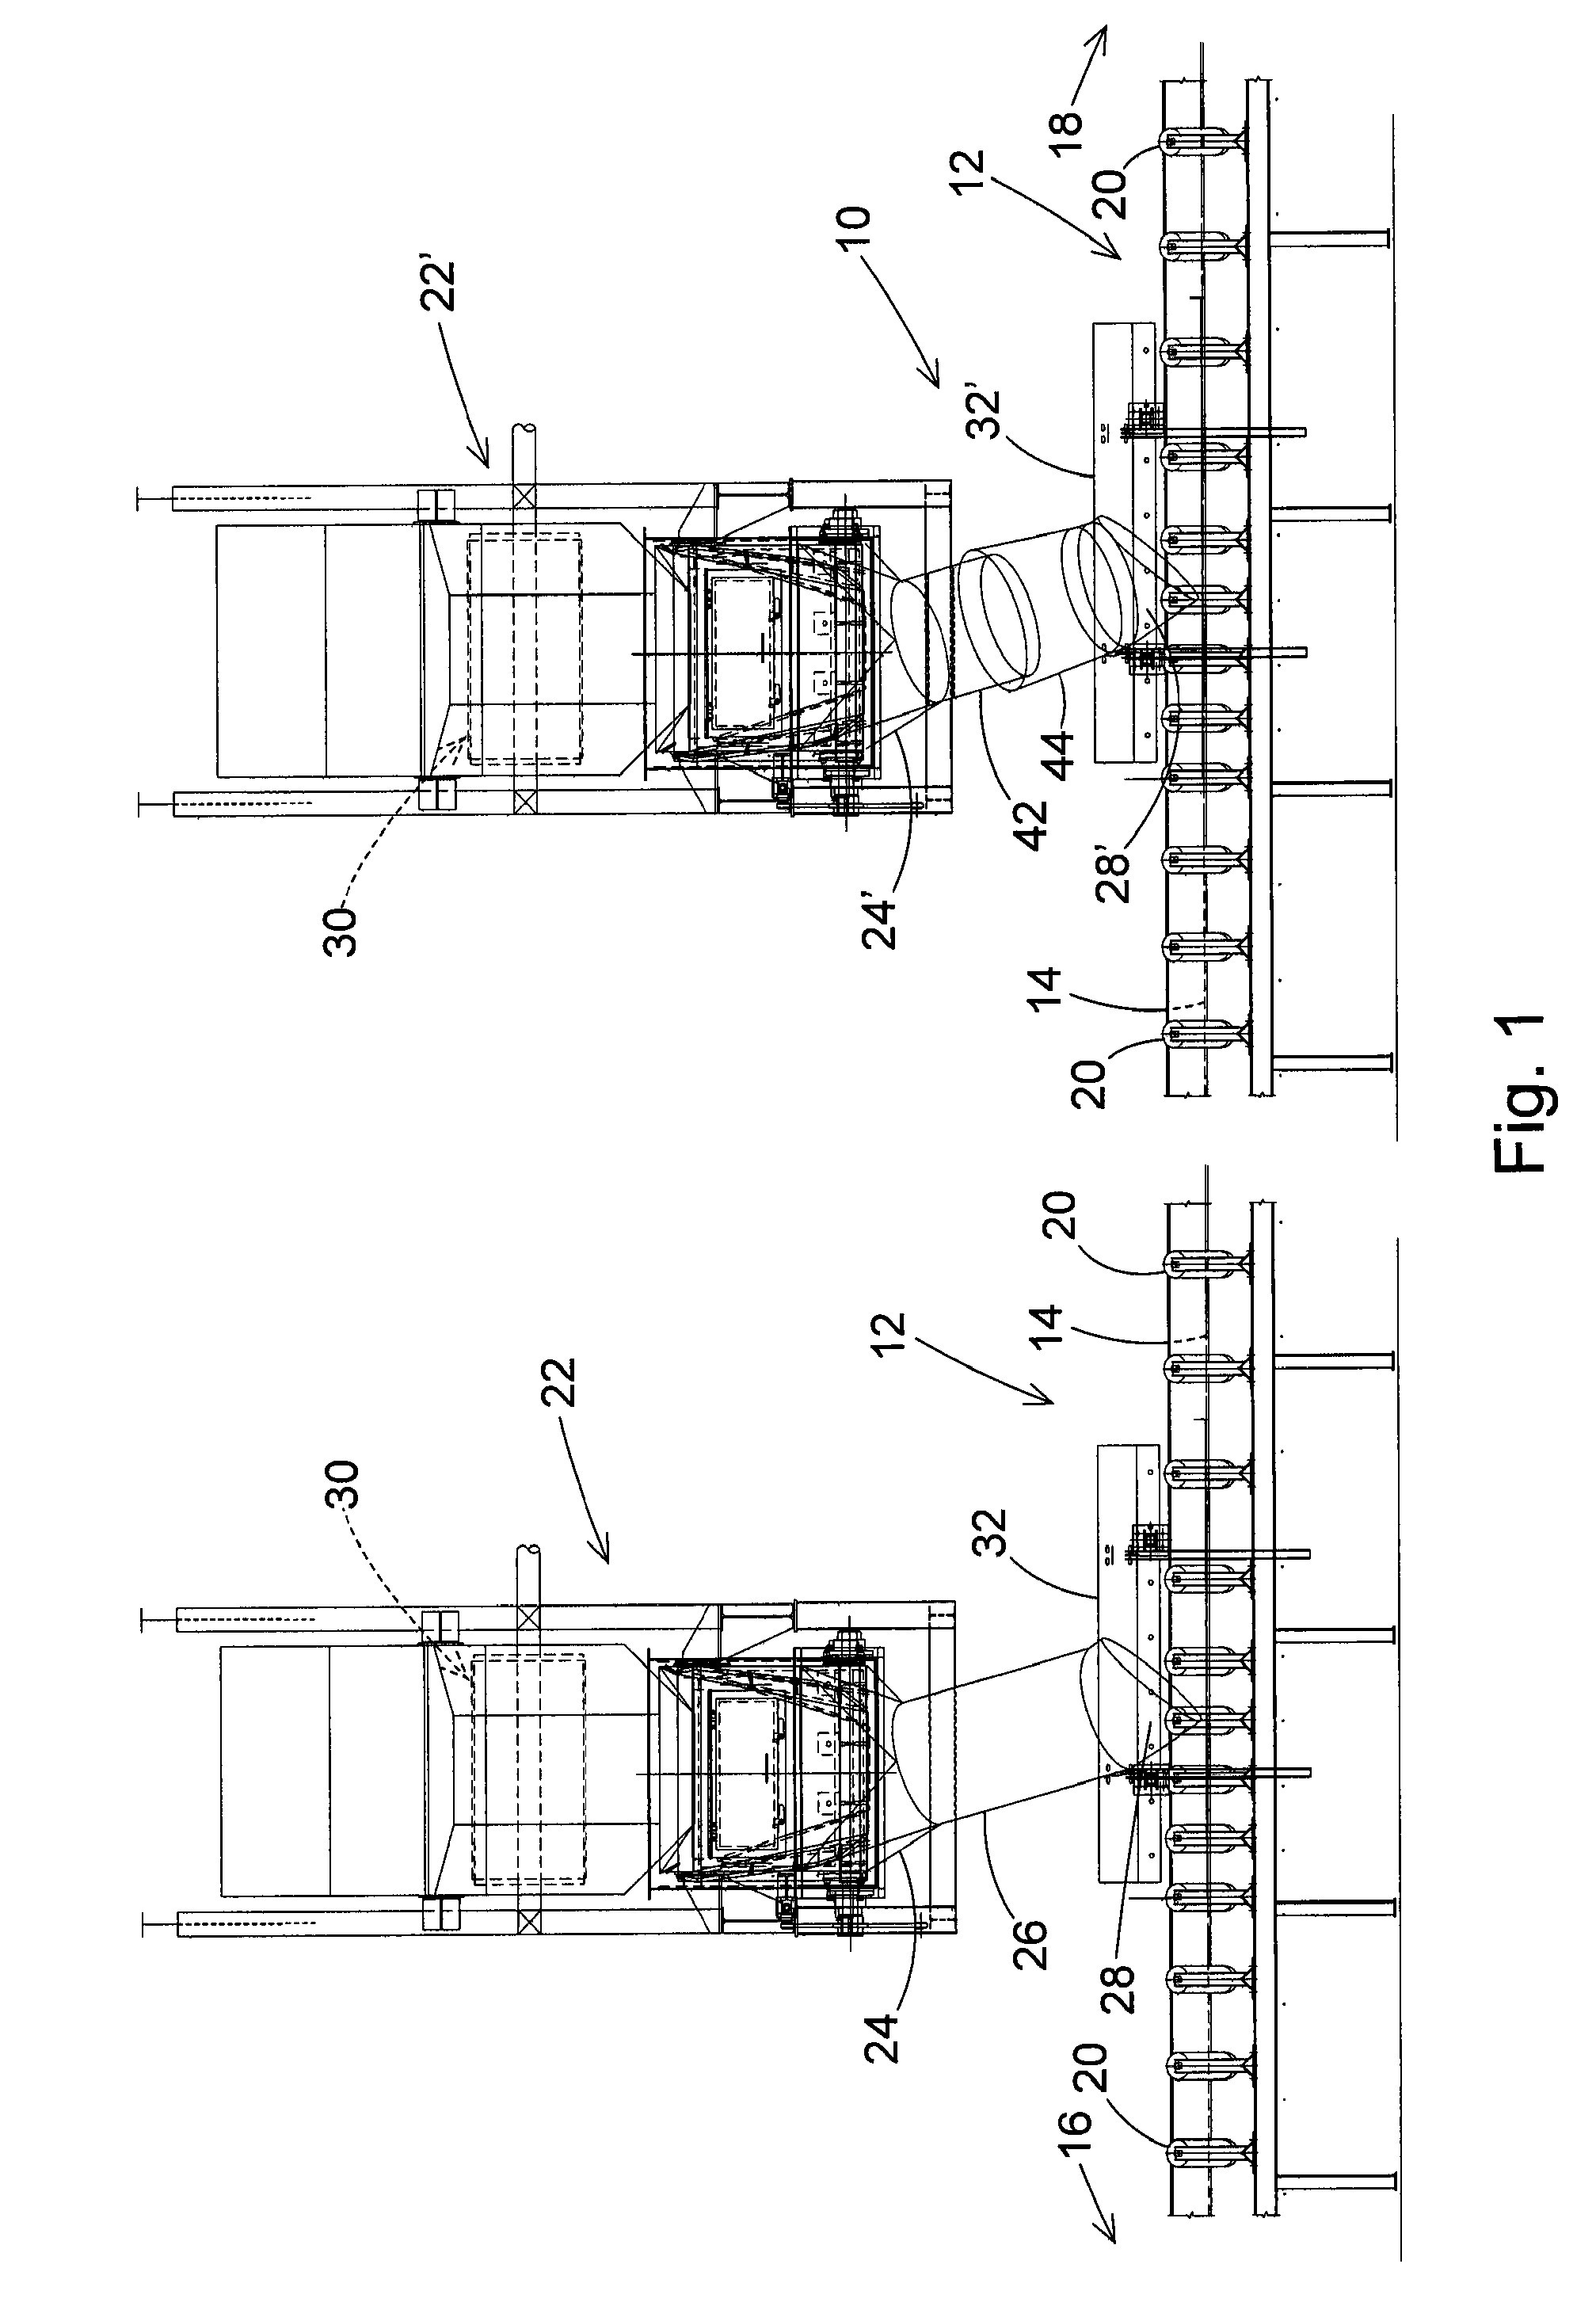 Retractable and extendable material loader apparatus for directing material onto a conveyor